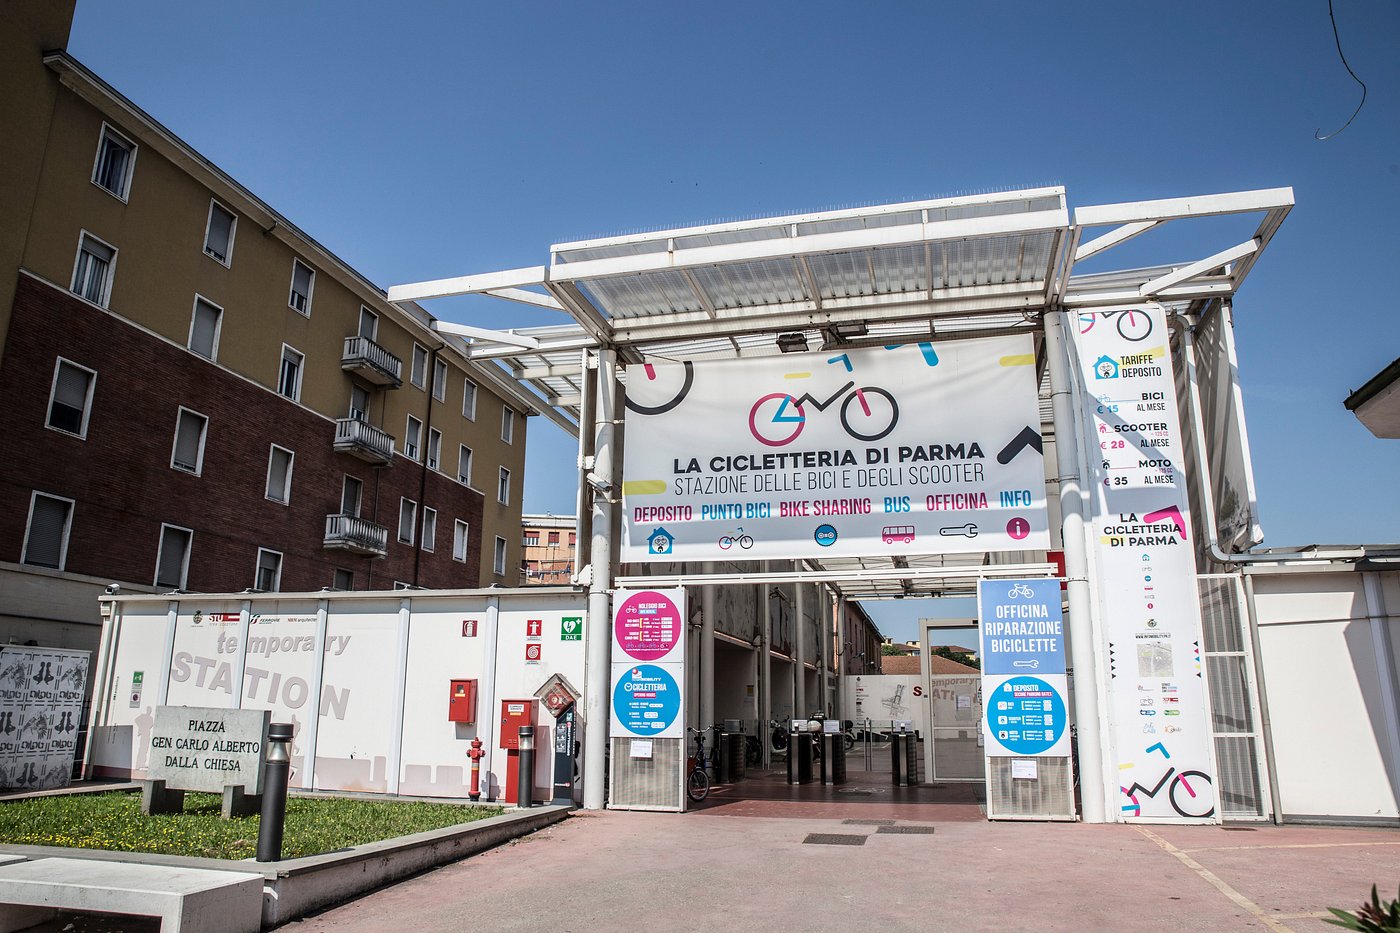 The Cicletteria di Parma, in the North of Italy, is a popular bike services point that combines both of the above purposes close to the city Train Station